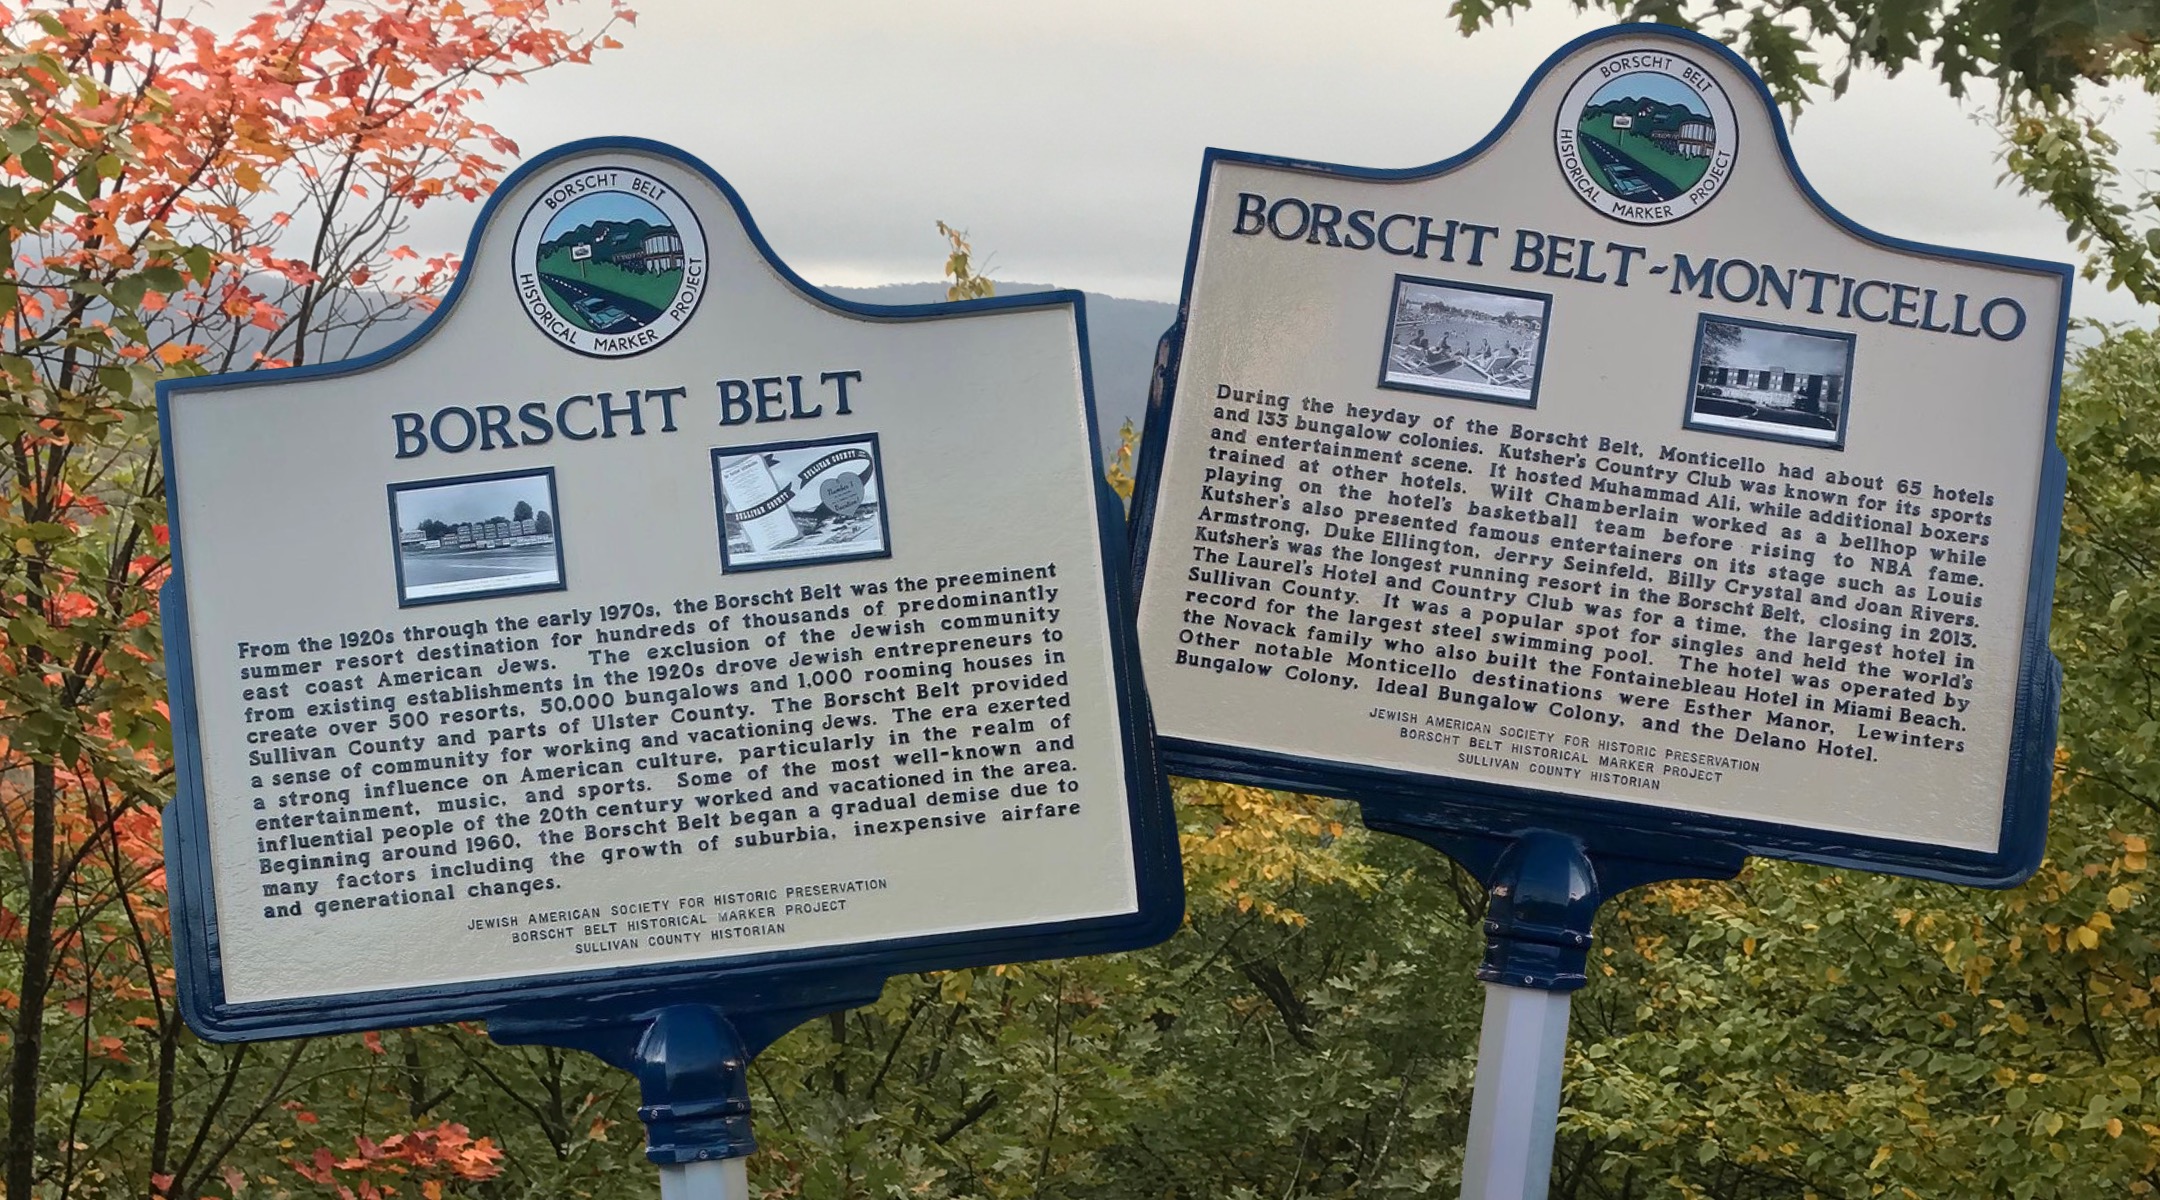 Seeking out sites from the bygone Borscht Belt? New historical markers lay out a path.